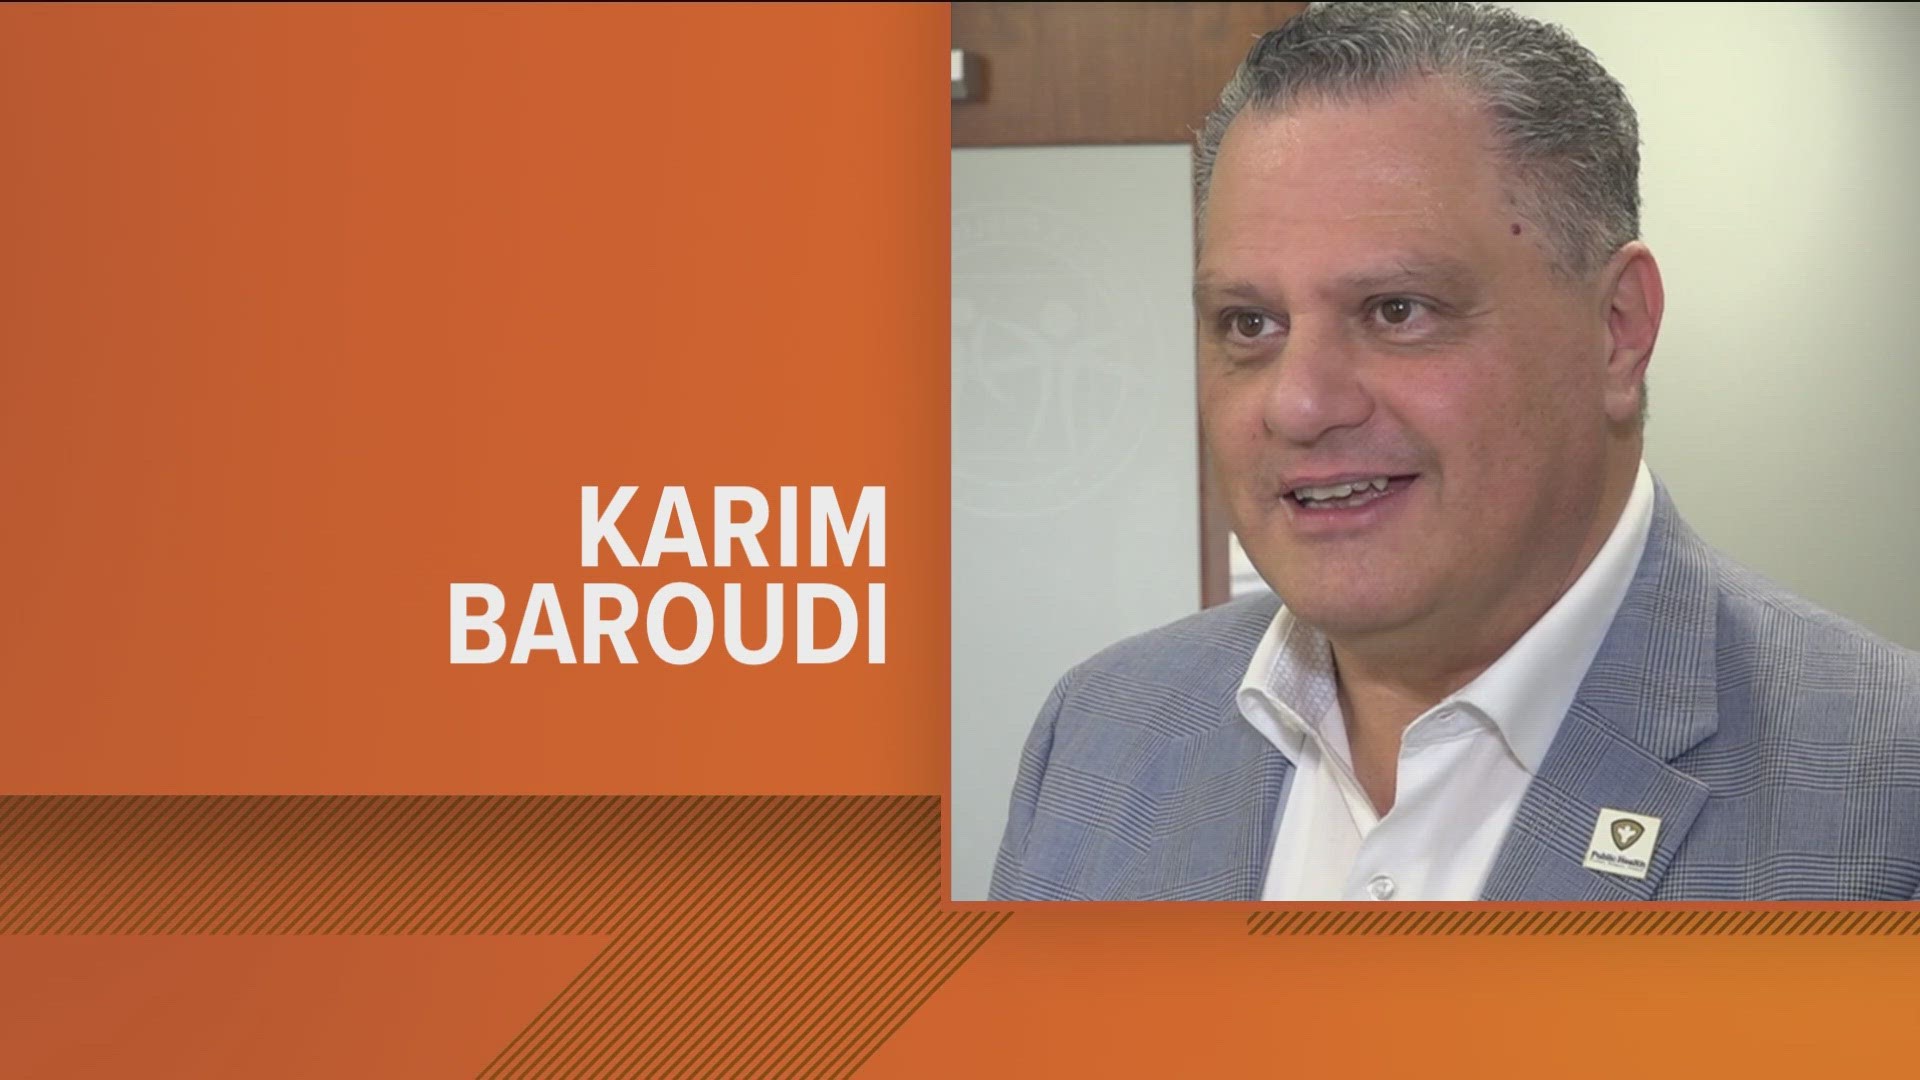 Karim Baroudi will be the next commissioner of the Toledo-Lucas County Health Department, a position he will begin in April.